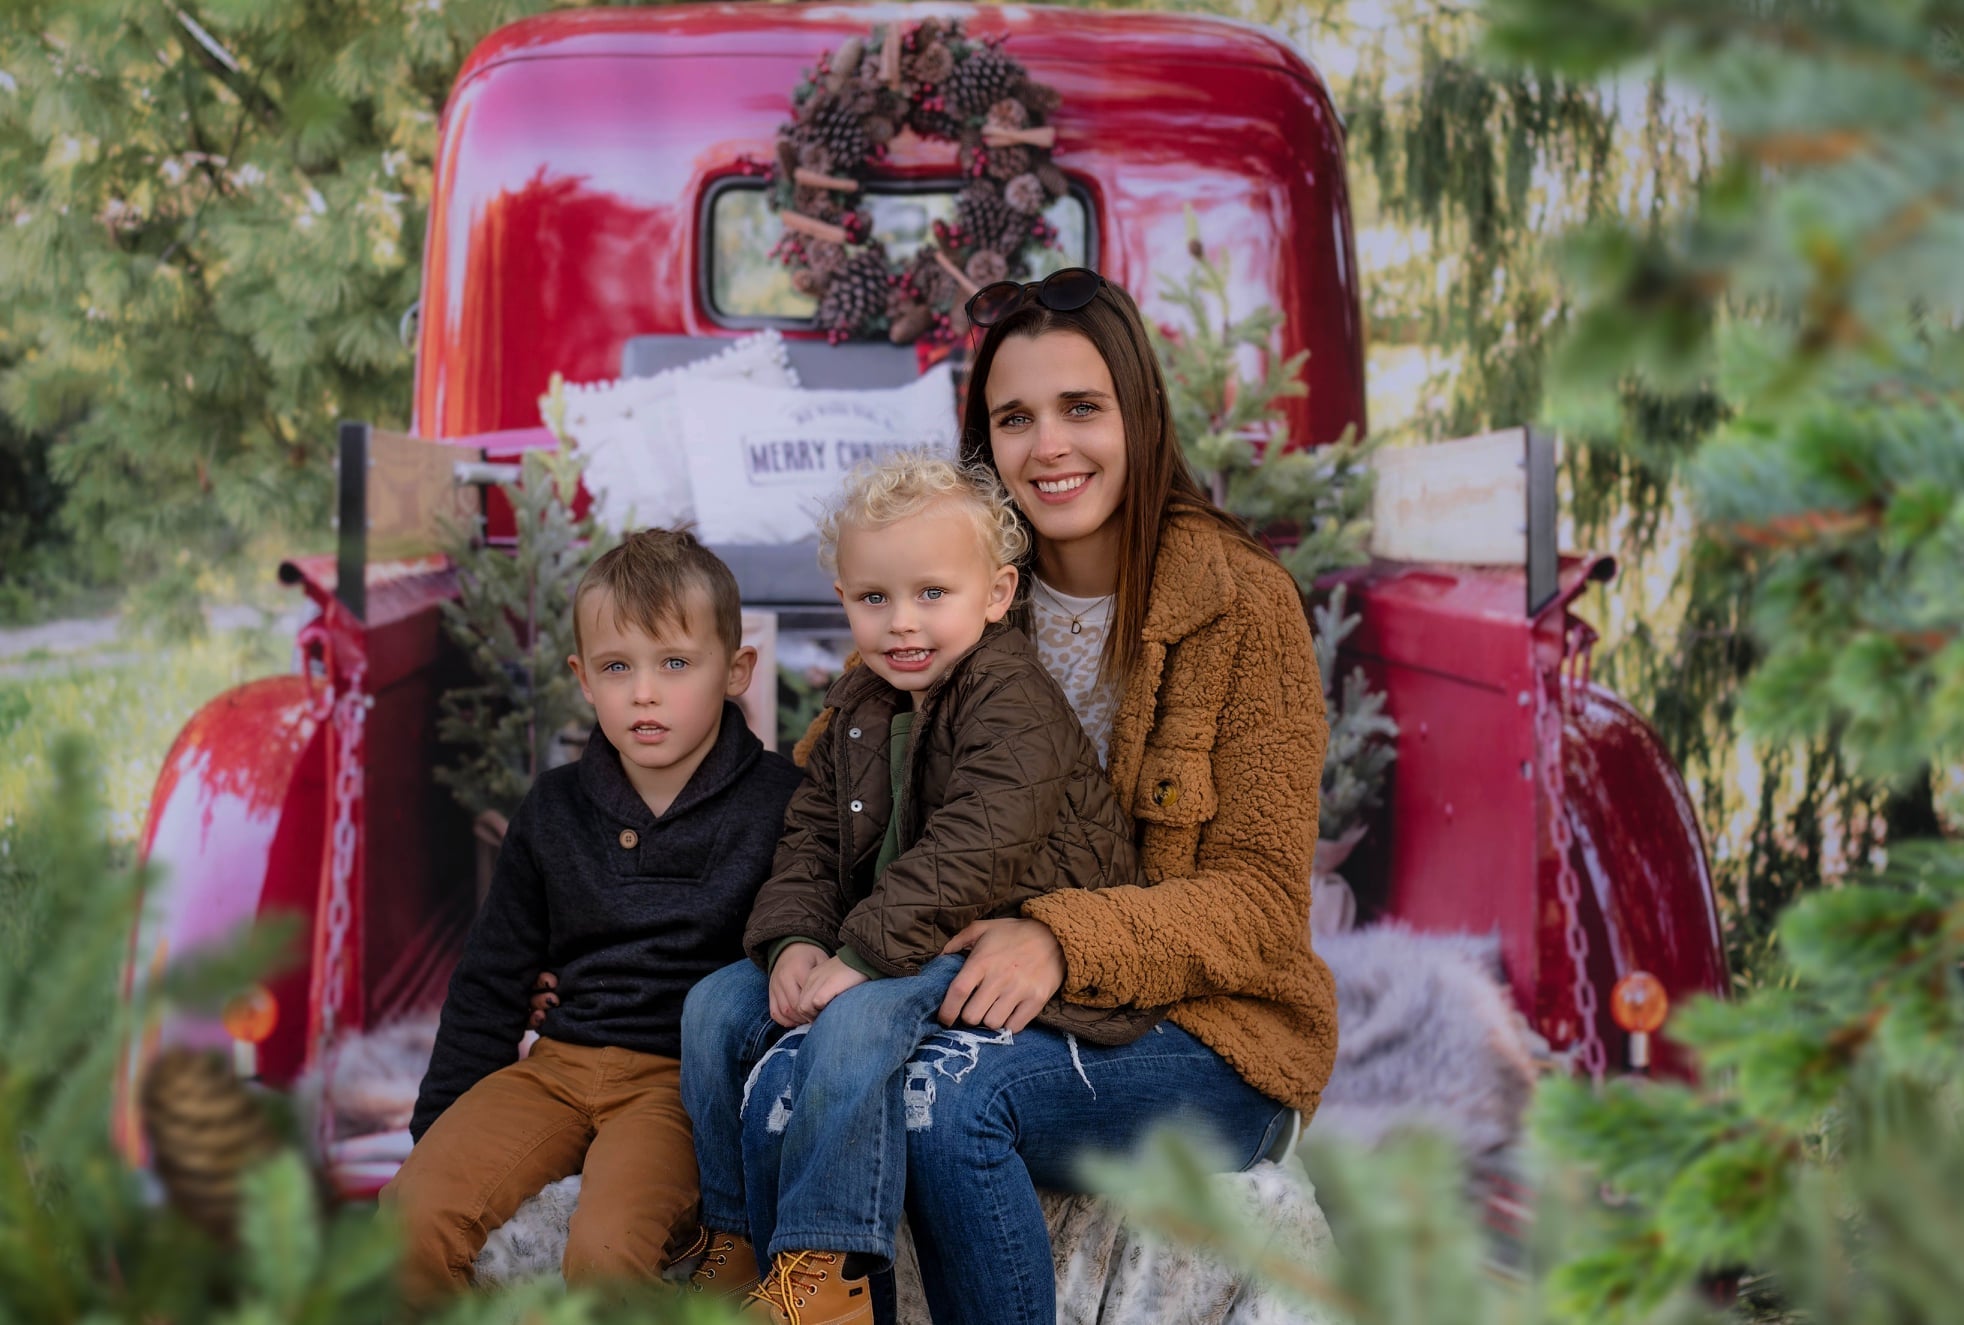 Kate 7x5ft Red Christmas Truck Backdrop for Photography (only ship to Canada)